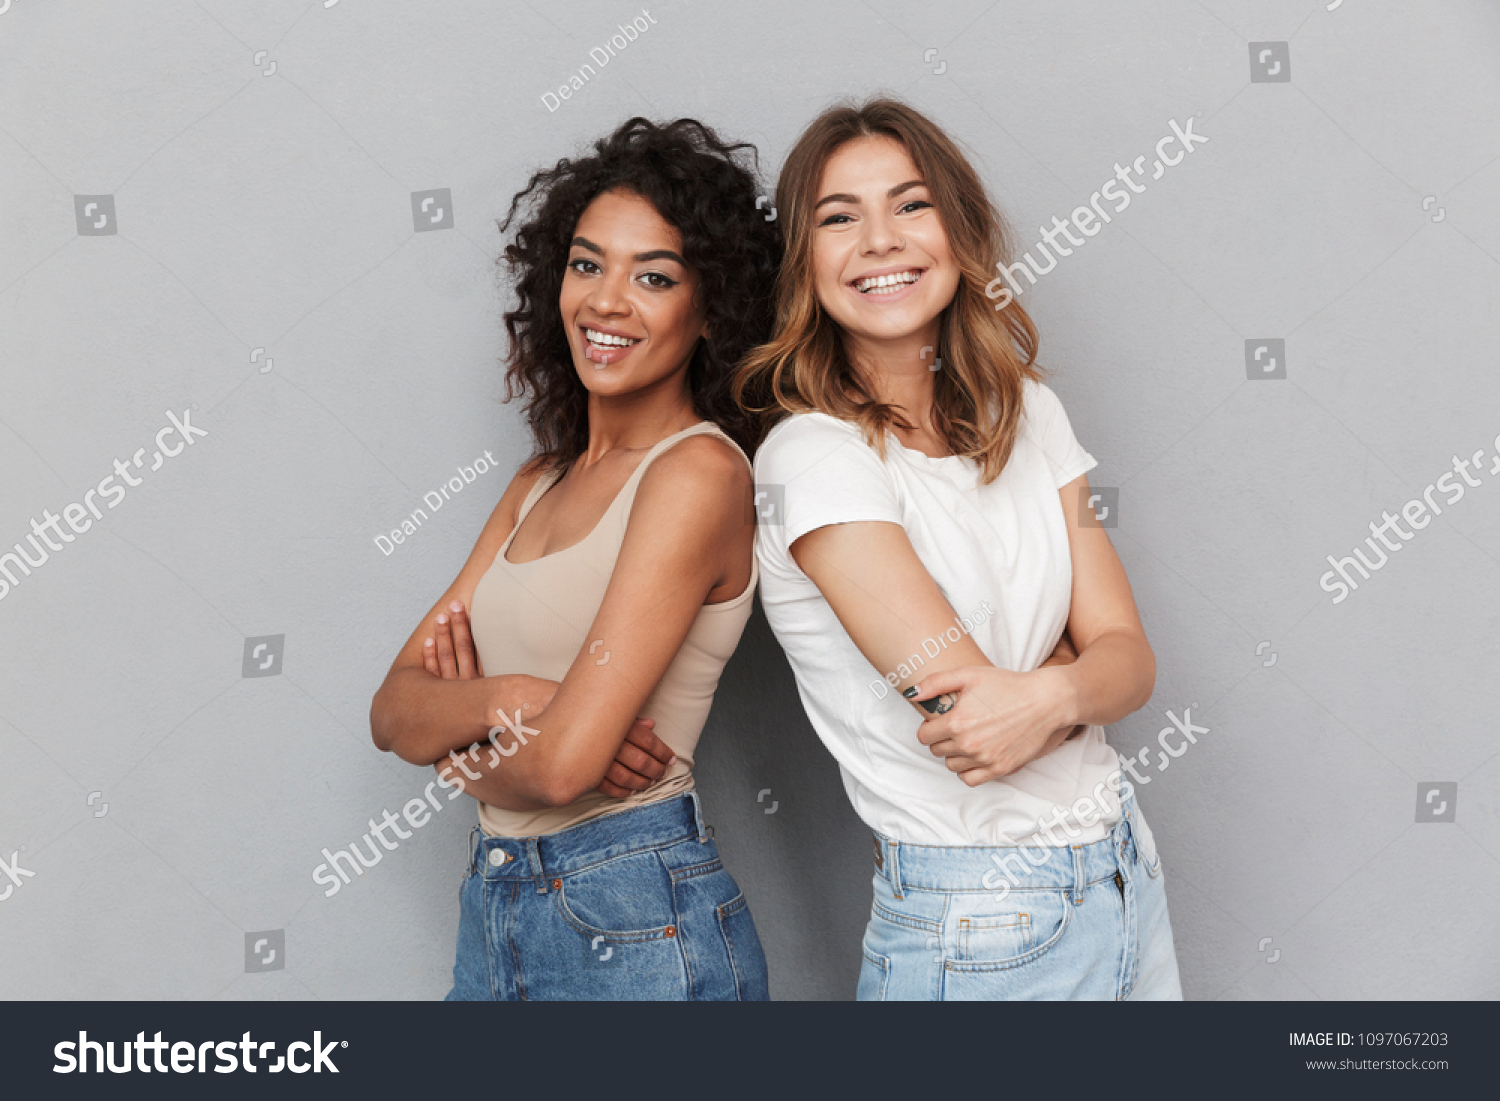 Portrait of two cheerful young women standing together and looking at camera isolated over gray background #1097067203